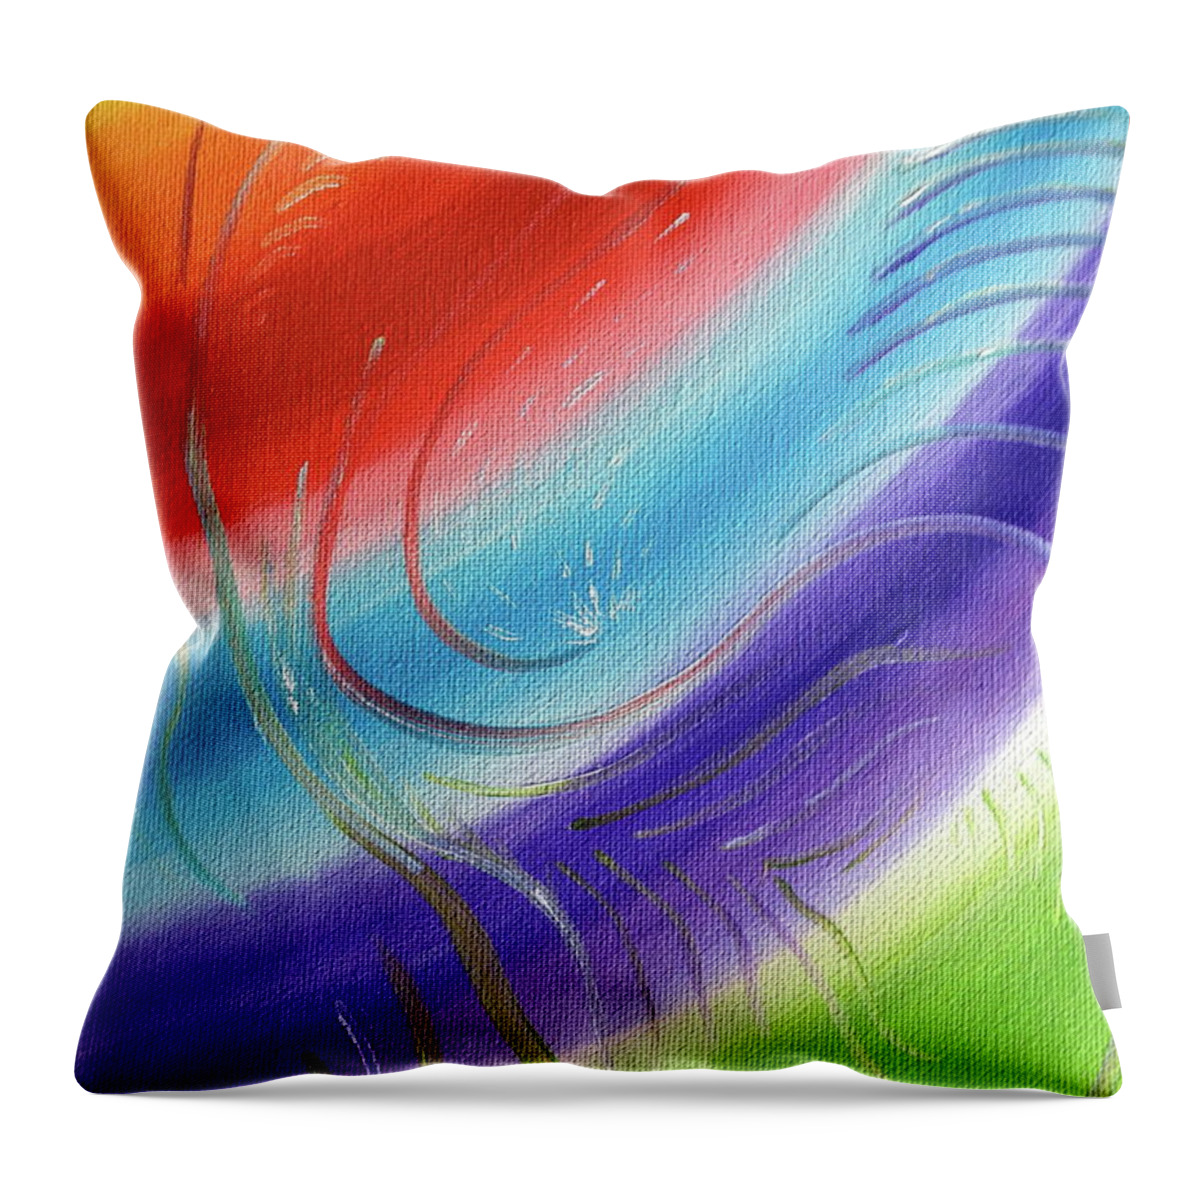 Happiness Throw Pillow featuring the painting Happiness by Beverley Ritchings